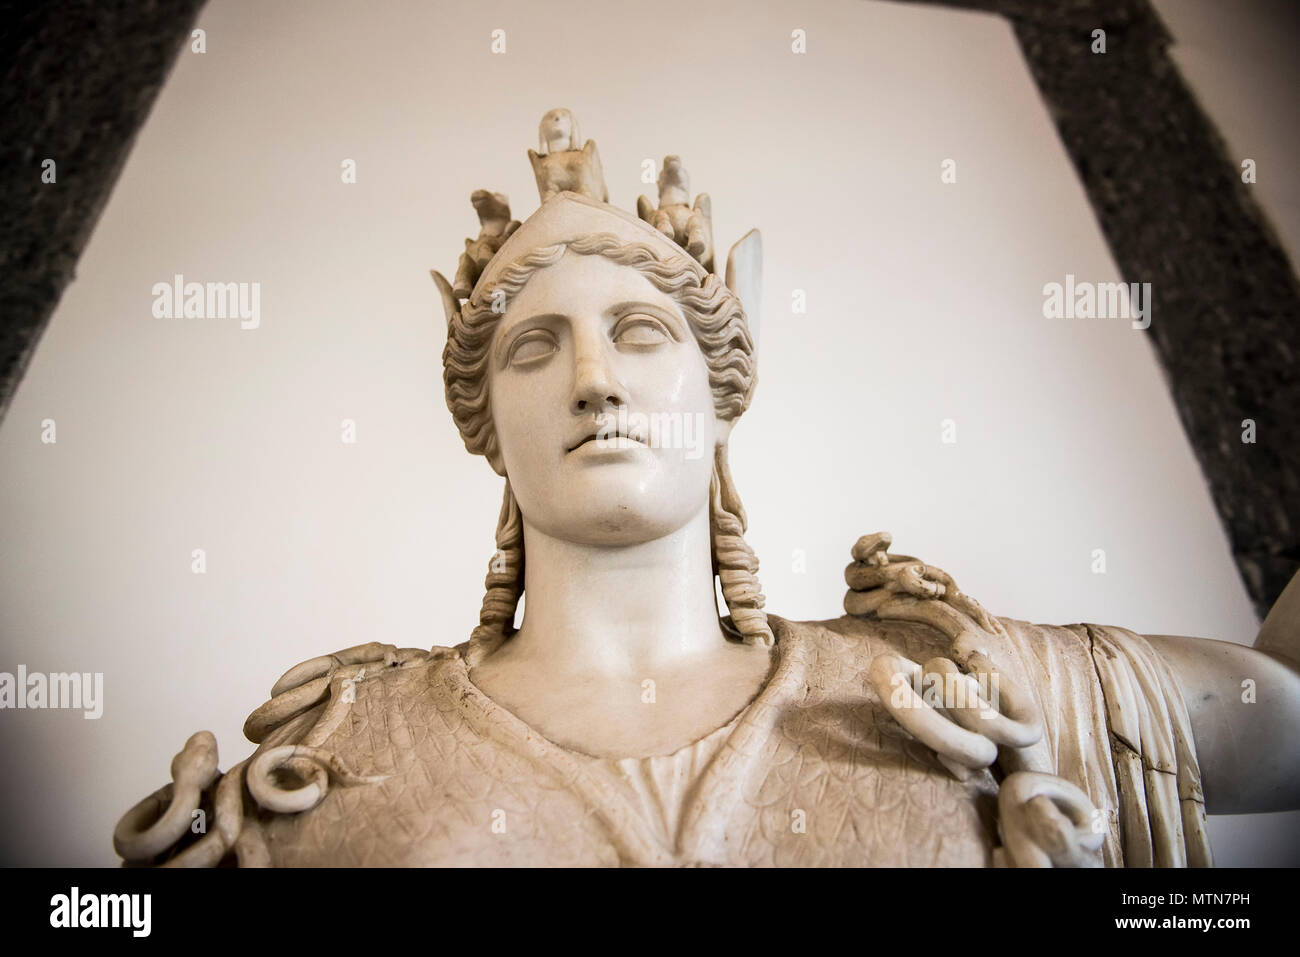 A statue Athena or Athene, the ancient Greek goddess, exhibited inside the Naples Archaelogical Museum in Italy. Stock Photo